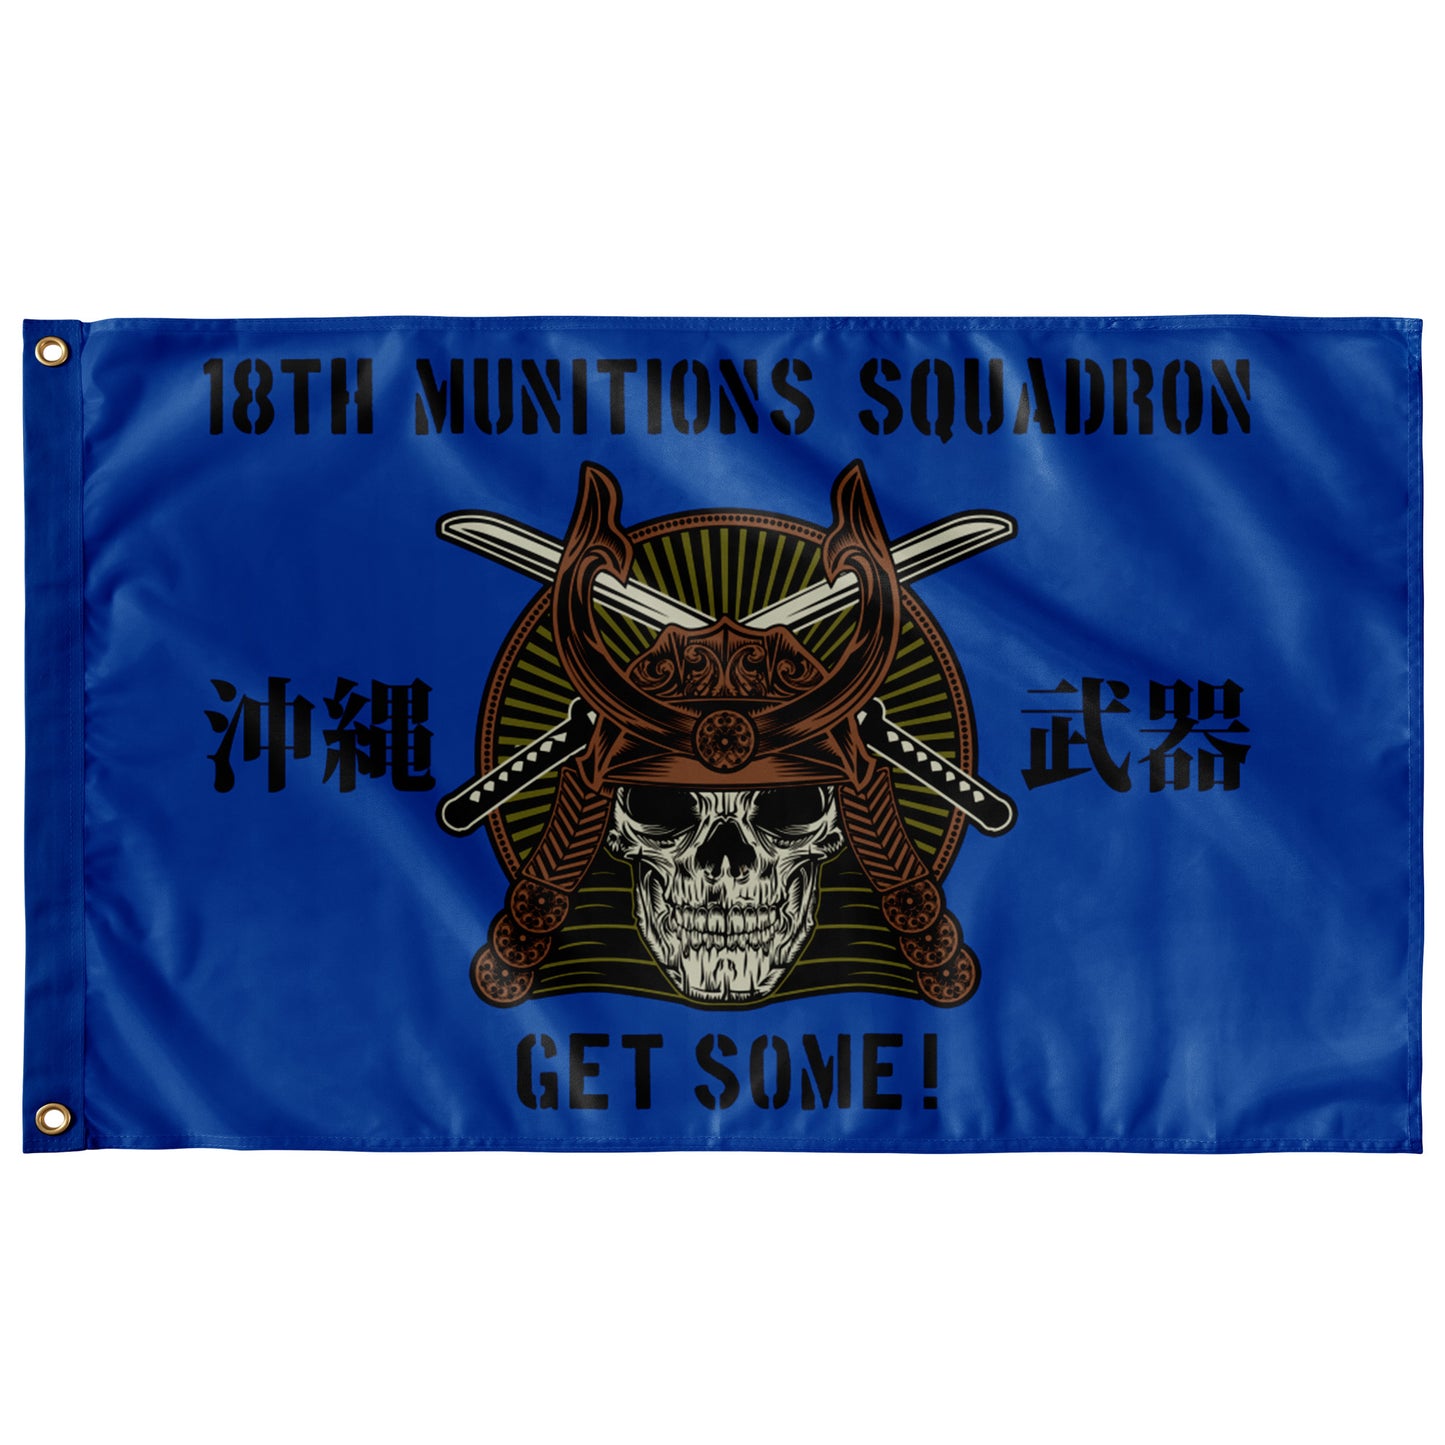 18 MUNS Weapons Only Version Updated 5' X 3' Wall Flag